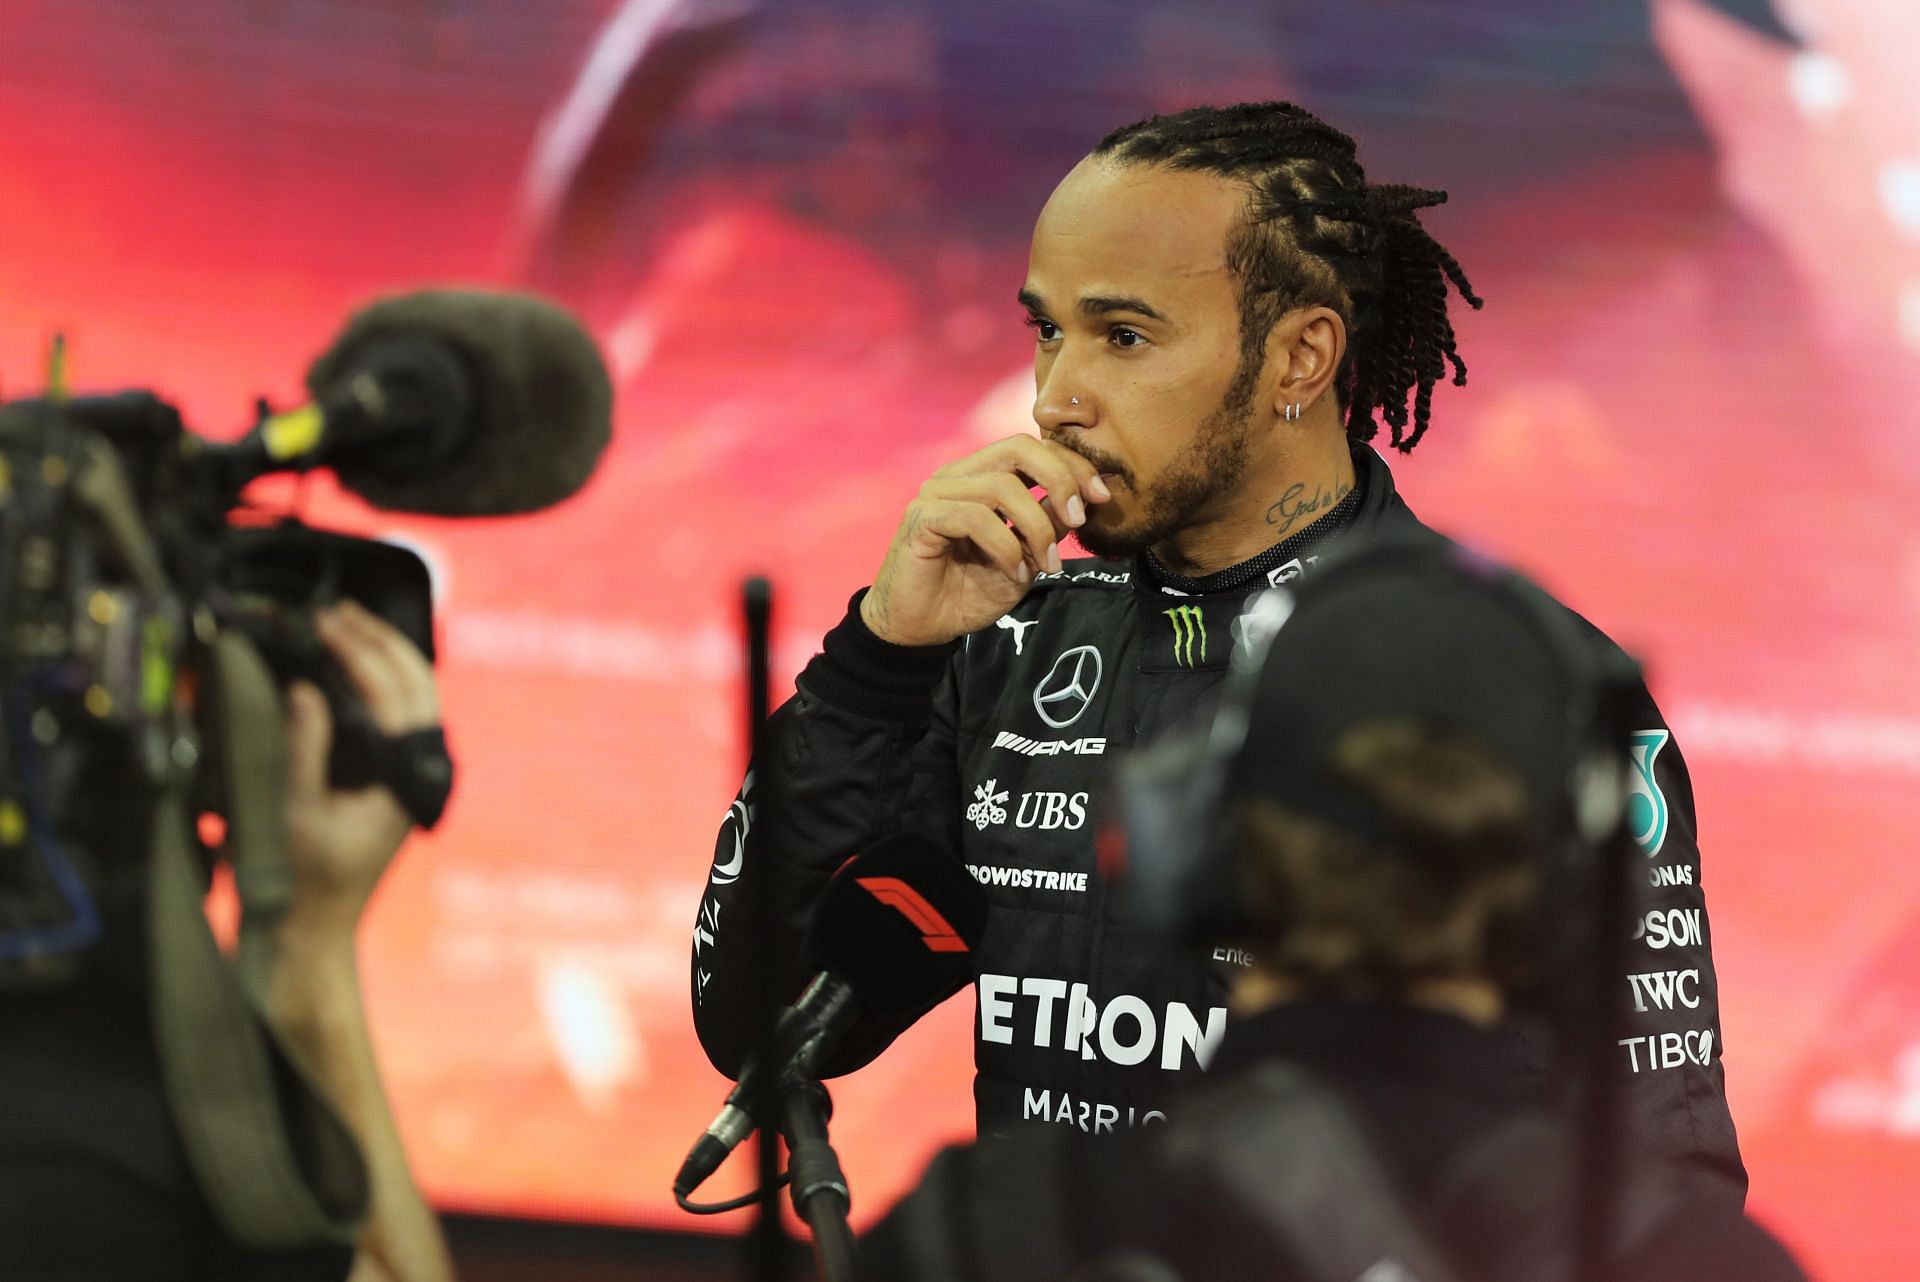 Lewis Hamilton during the post race interviews at the 2021 Abu Dhabi Grand Prix